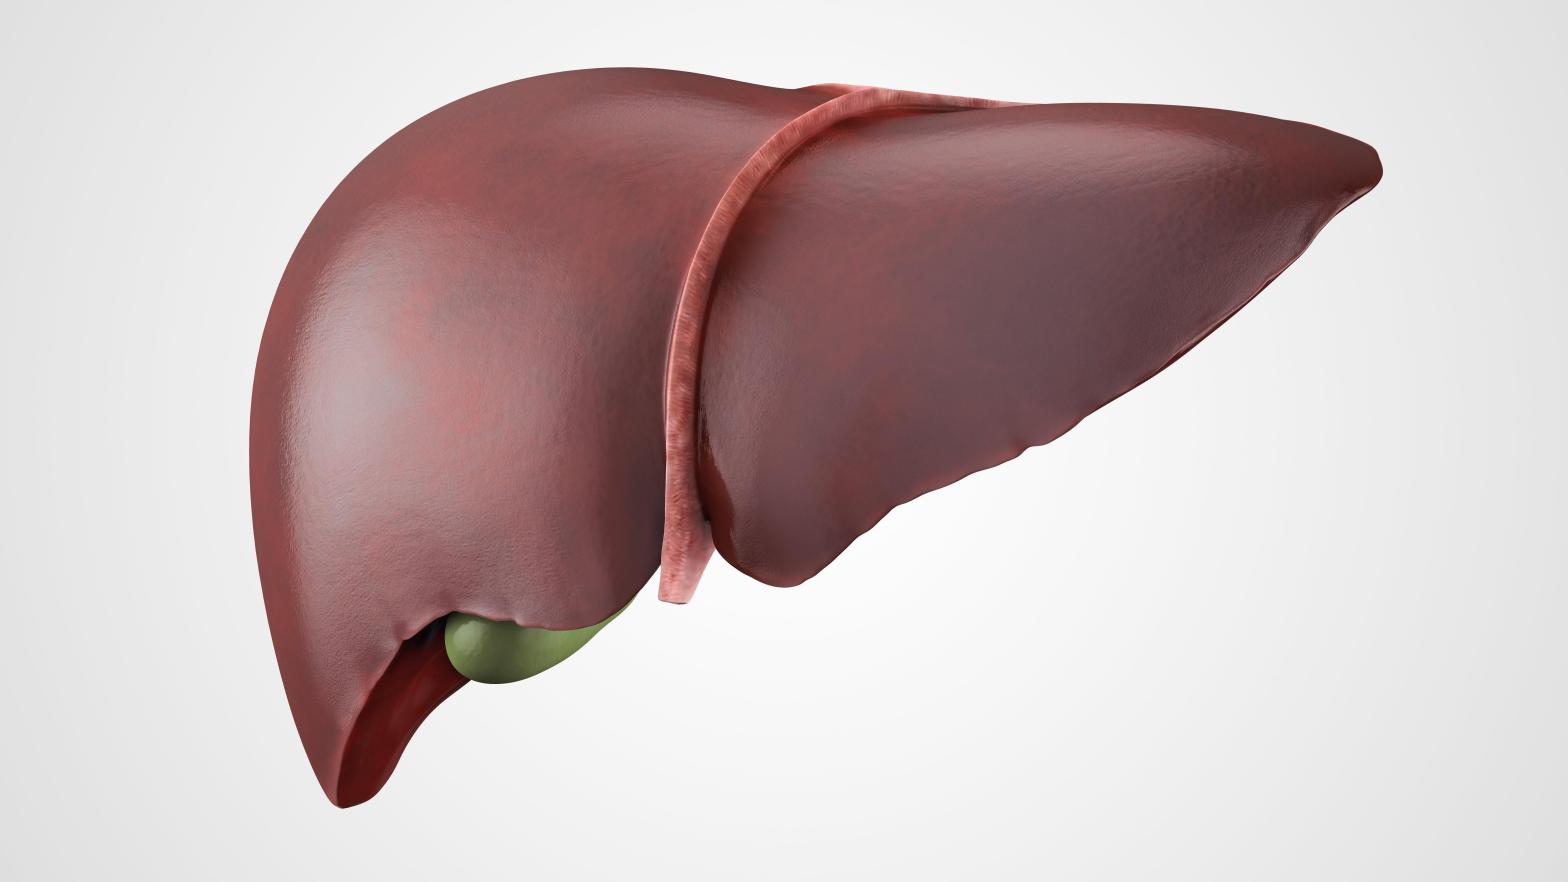 A realistic anatomical model of healthy human liver with gallbladder isolated. (Image: Shutterstock, Shutterstock)